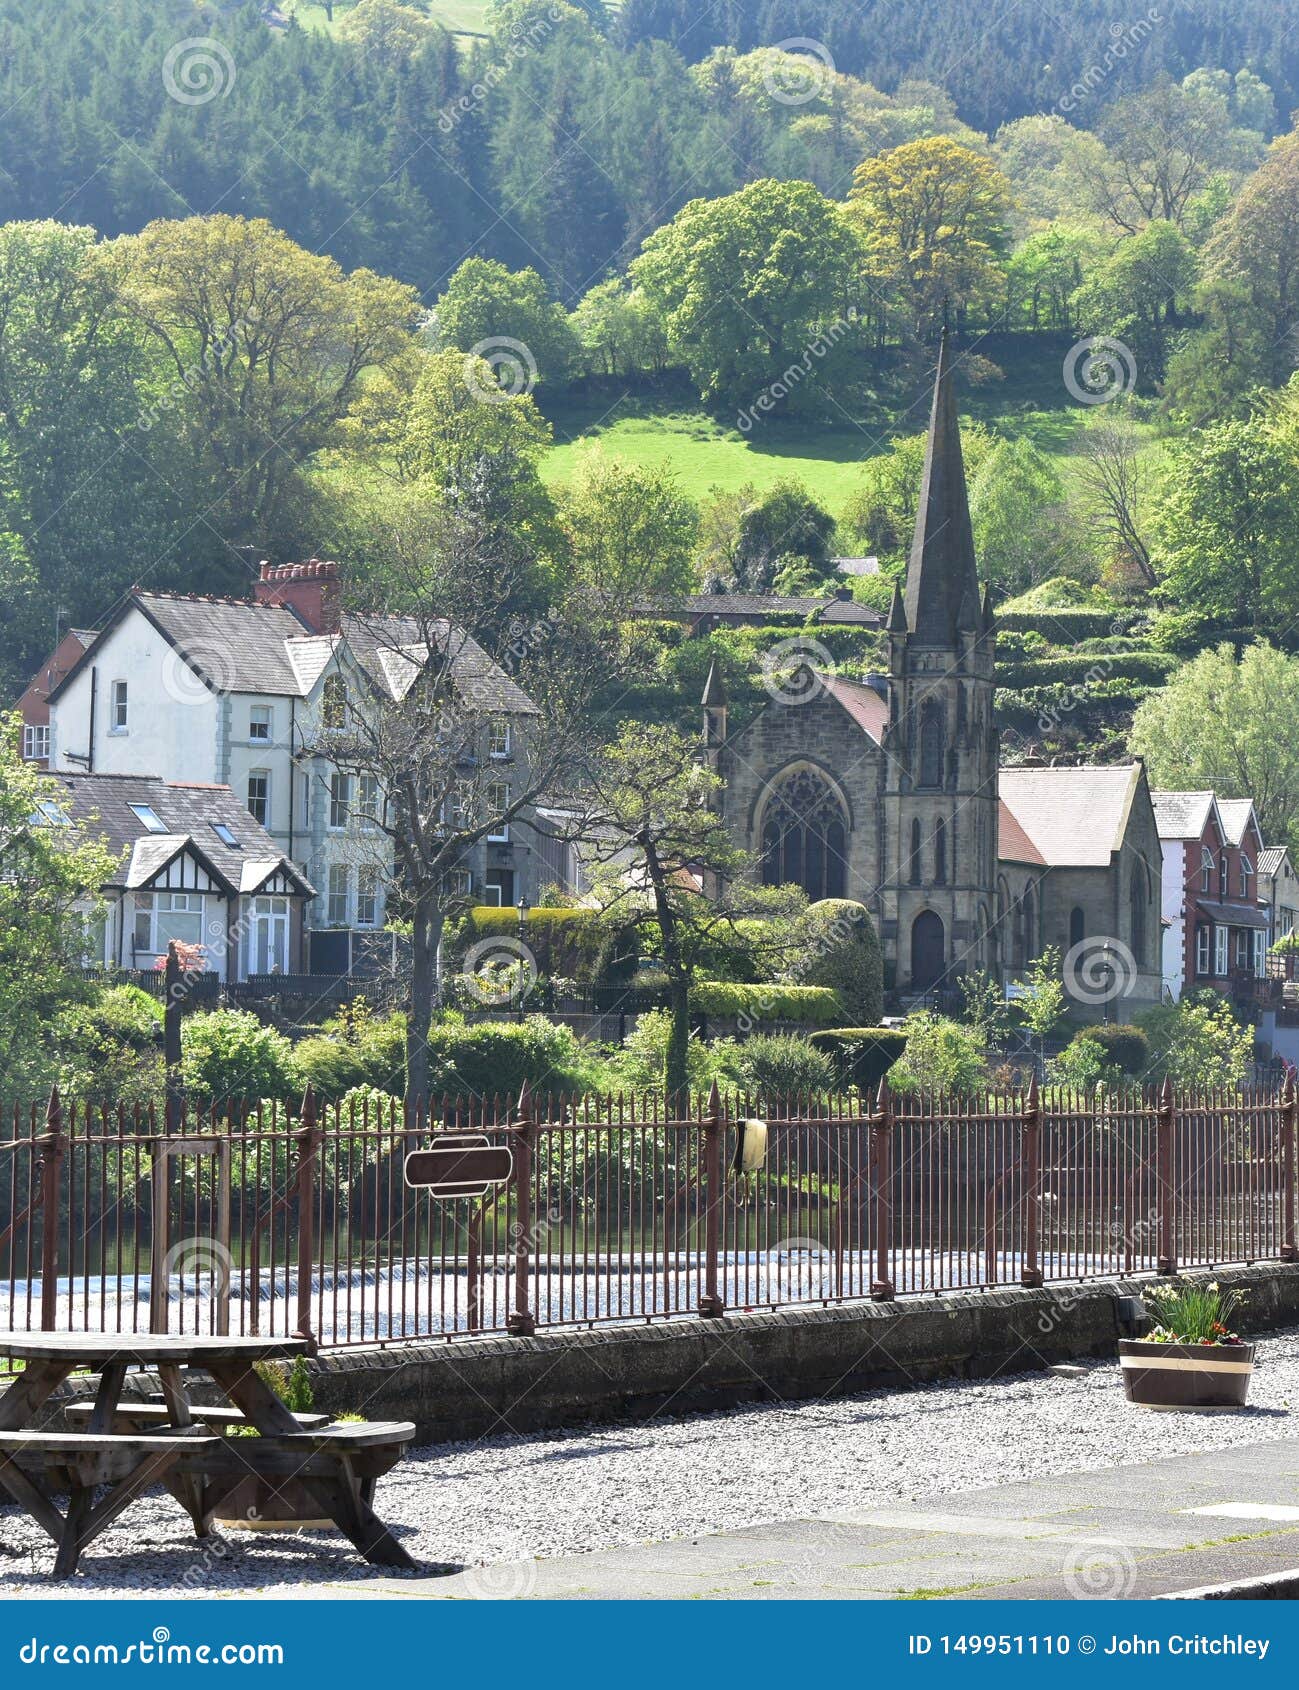 north wales, llangollen.  a bight spring day.  river dee.  wooded hillsides.